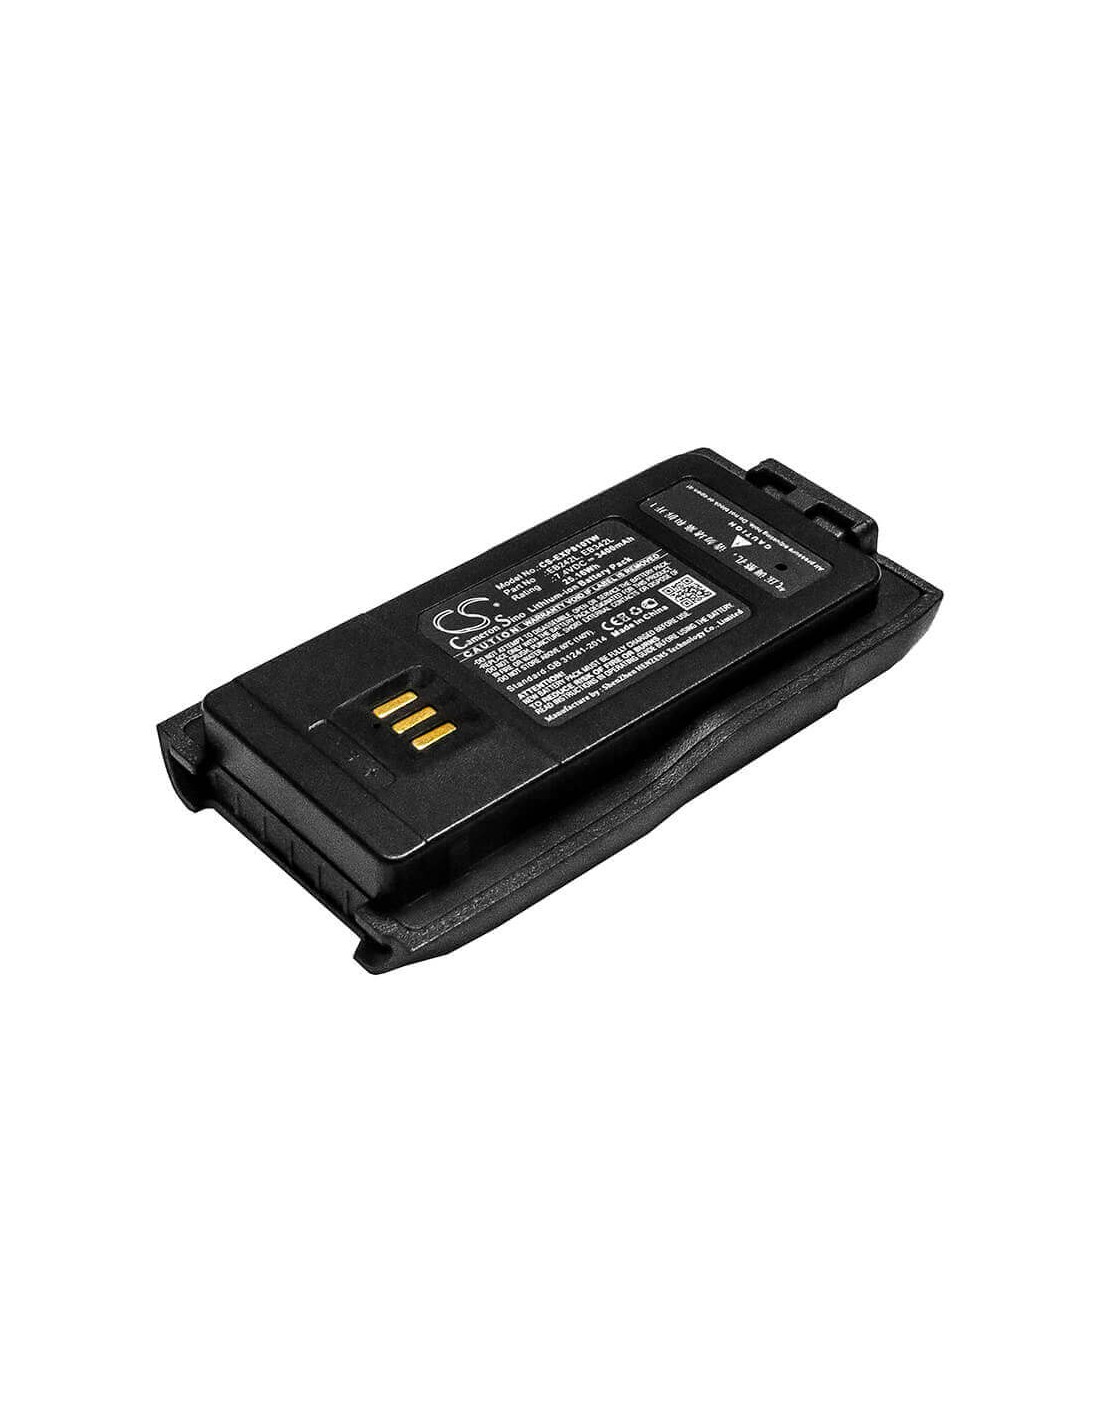 Battery for Diquea, Ep8000, Ep8100, Excera 7.4V, 3400mAh - 25.16Wh